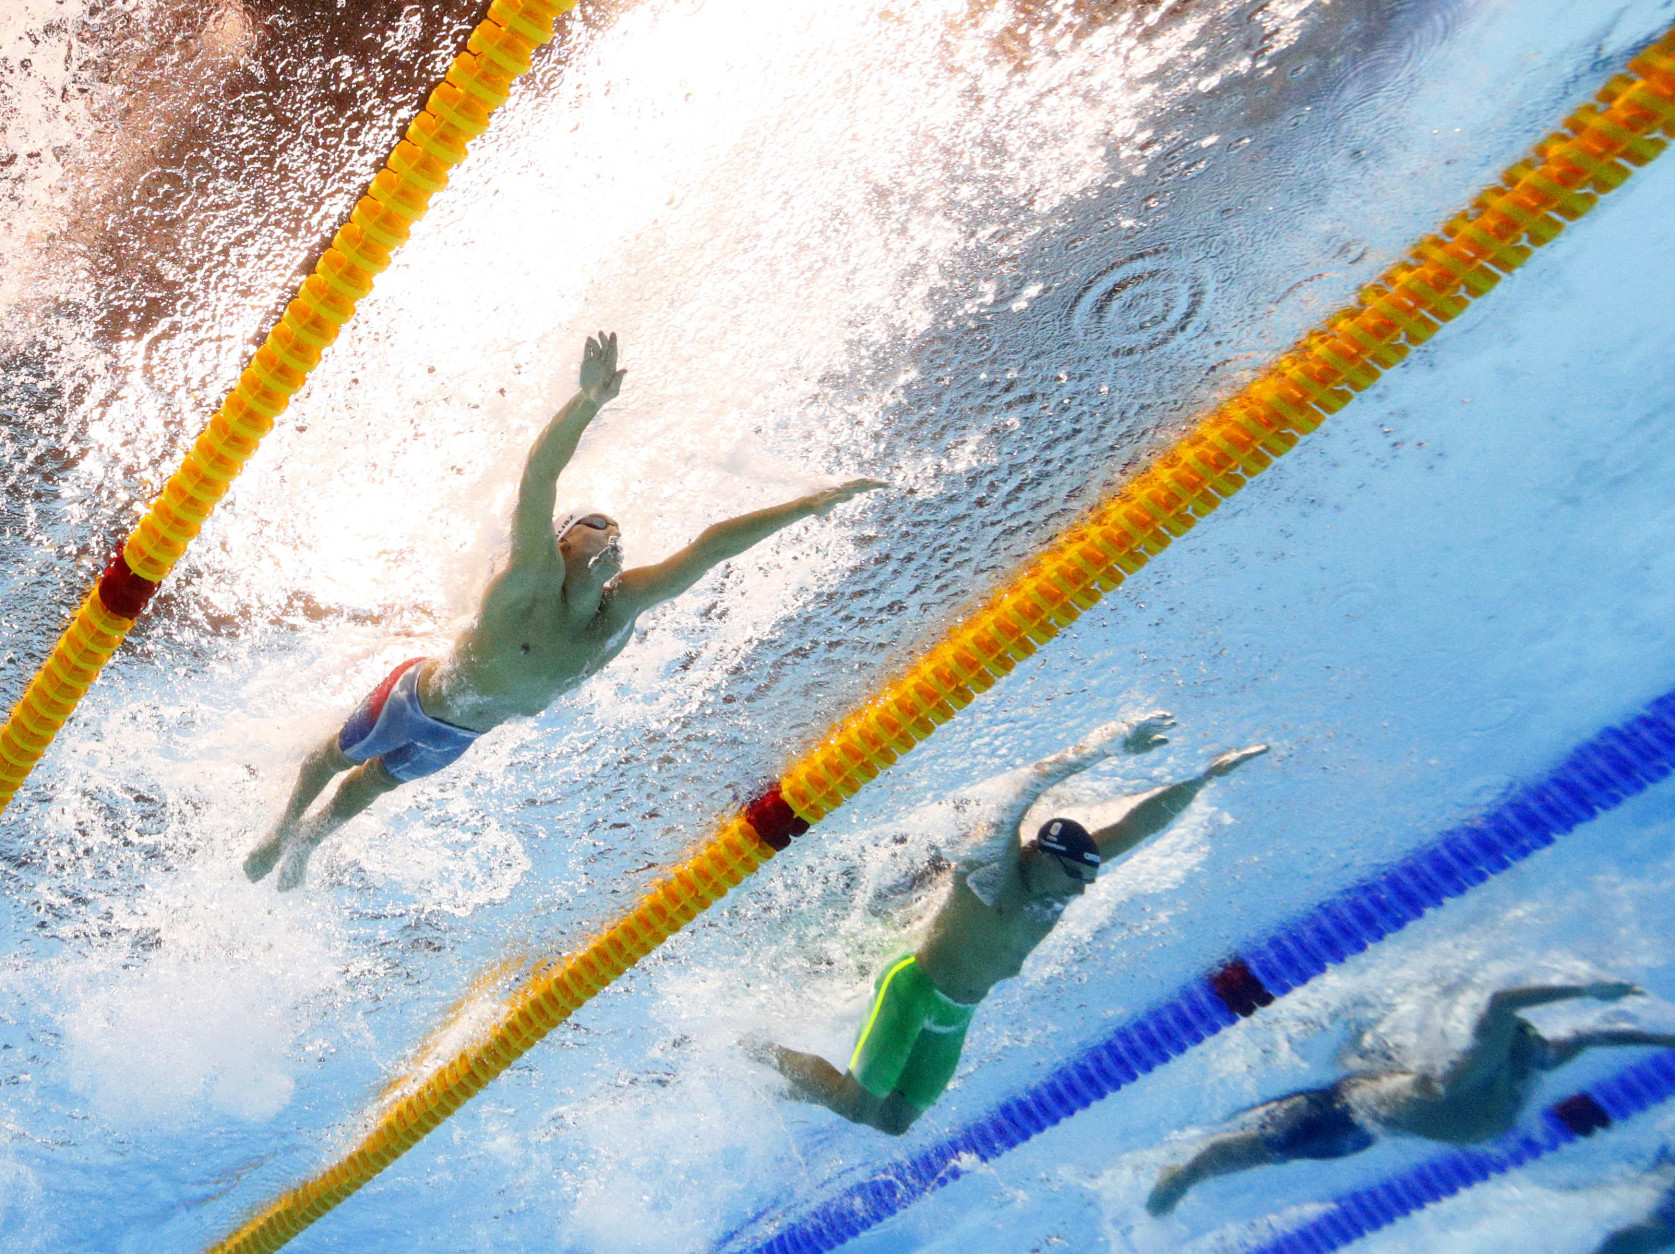 United States' Chase Kalisz, left, competes in a heat of the men's 400m individual medley during the swimming competitions at the 2016 Summer Olympics, Saturday, Aug. 6, 2016, in Rio de Janeiro, Brazil. (AP Photo/David J. Phillip)